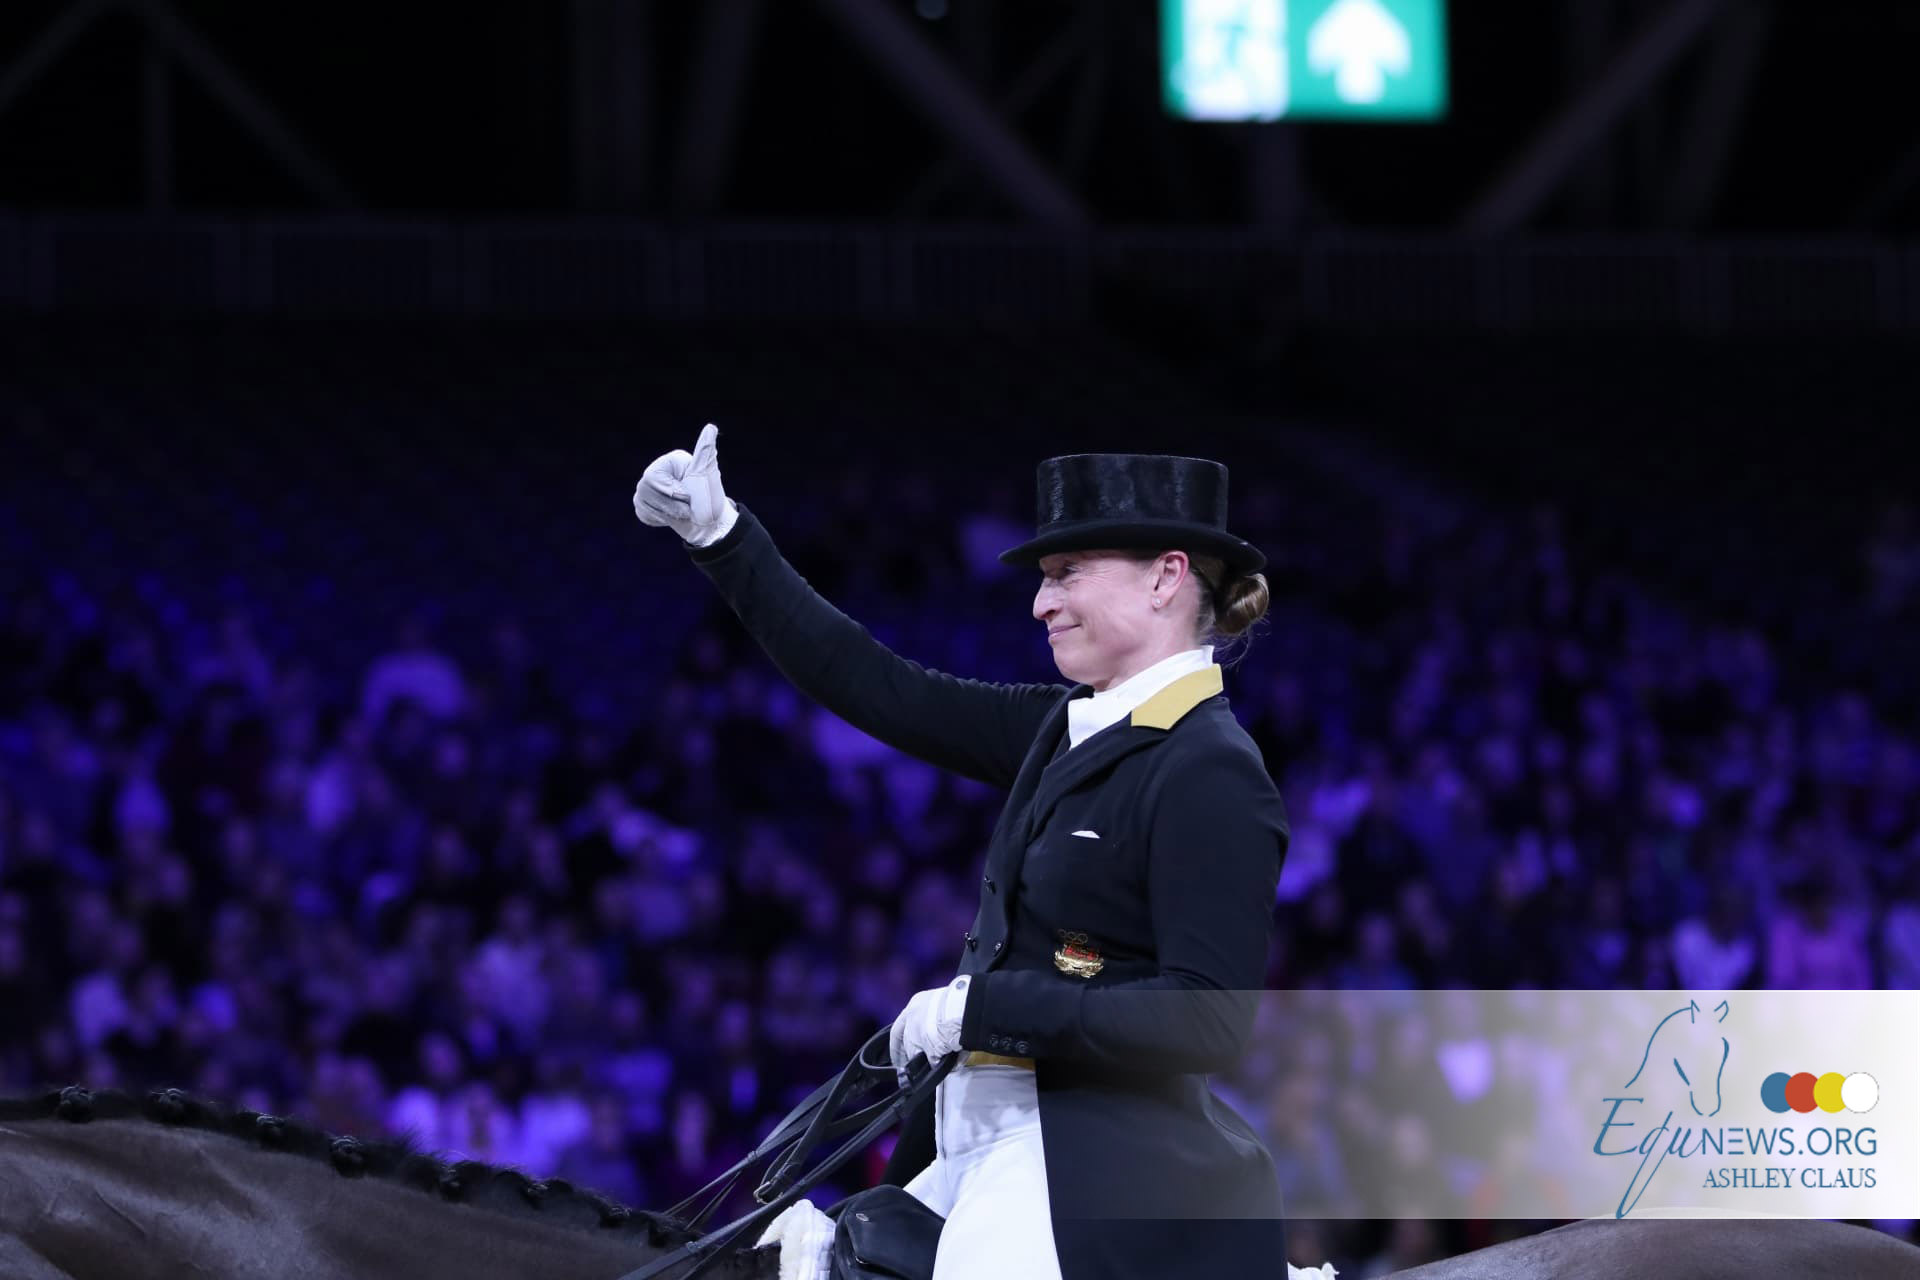 Isabell Werth wins Grand Prix in Amsterdam